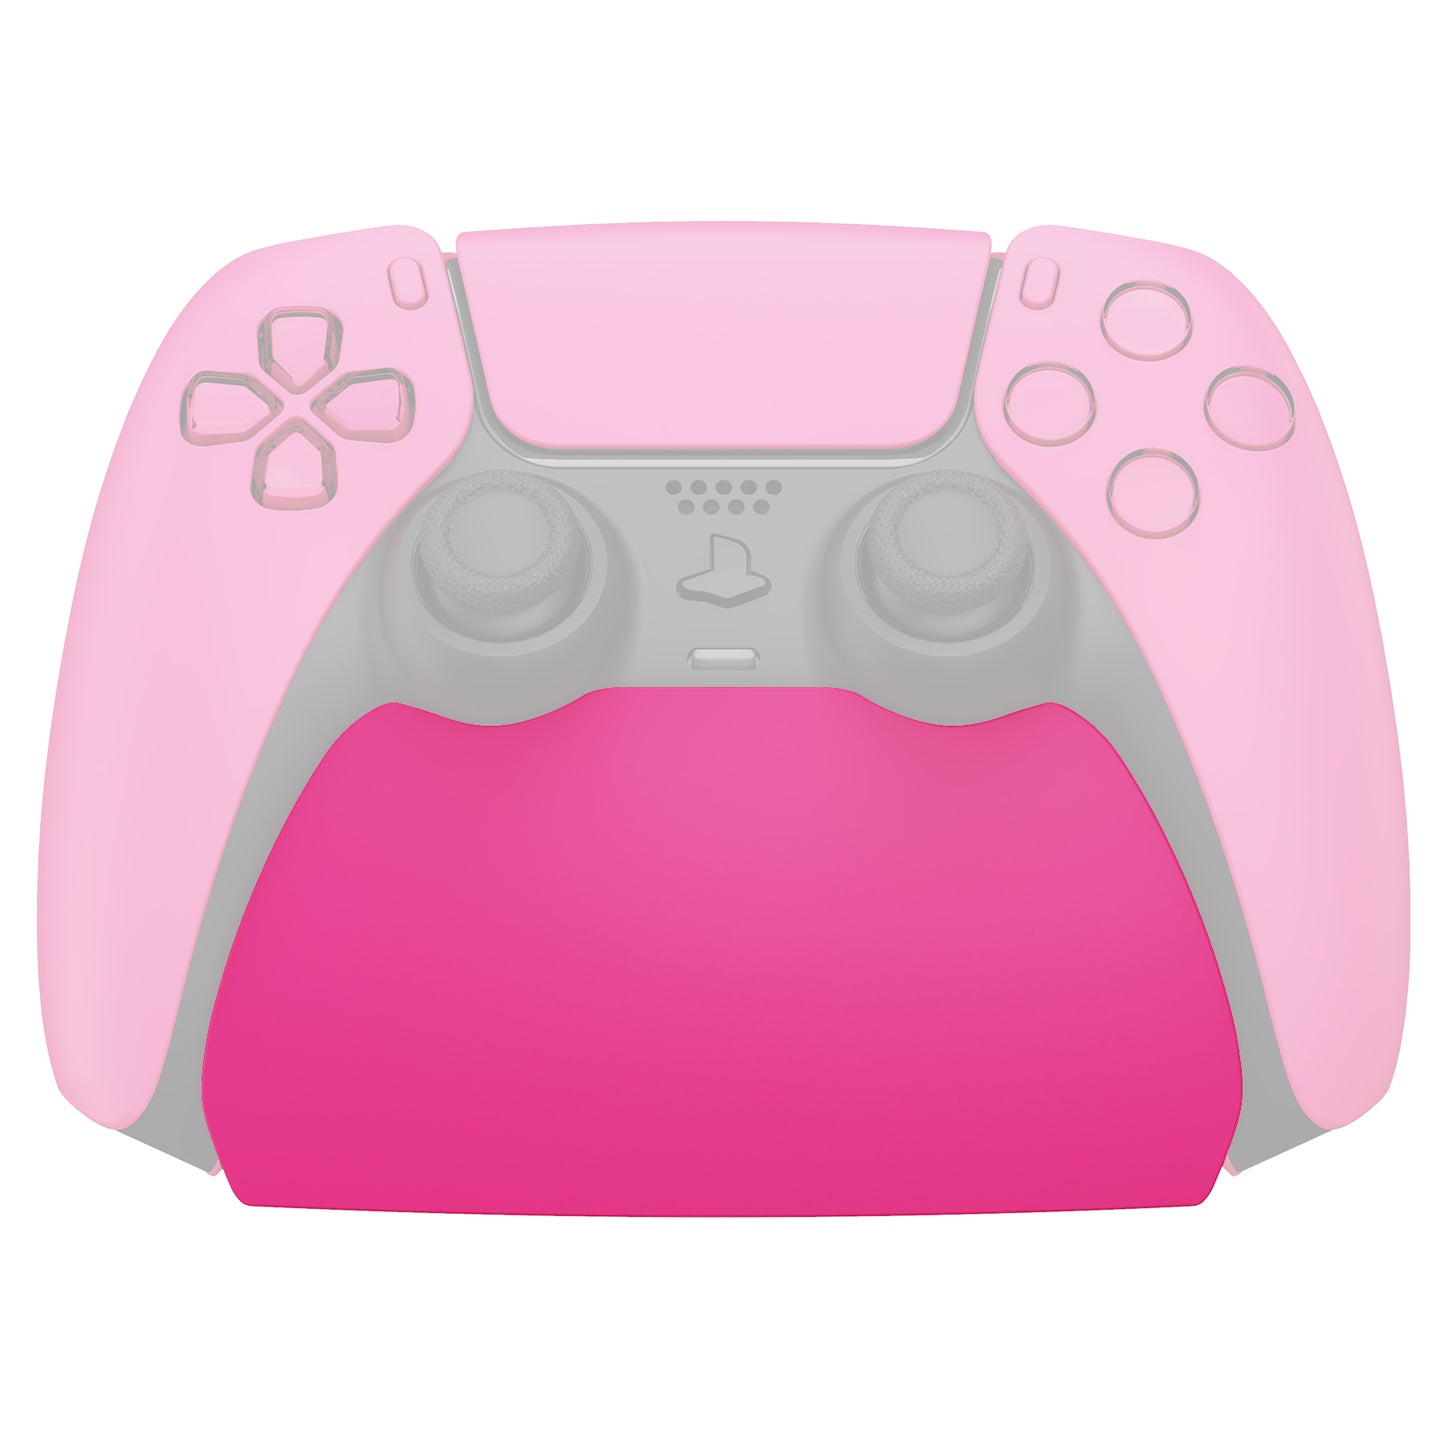 PlayVital Nova Pink Controller Display Stand for PS5, Gamepad Accessories  Desk Holder for PS5 Controller with Rubber Pads - PFPJ080